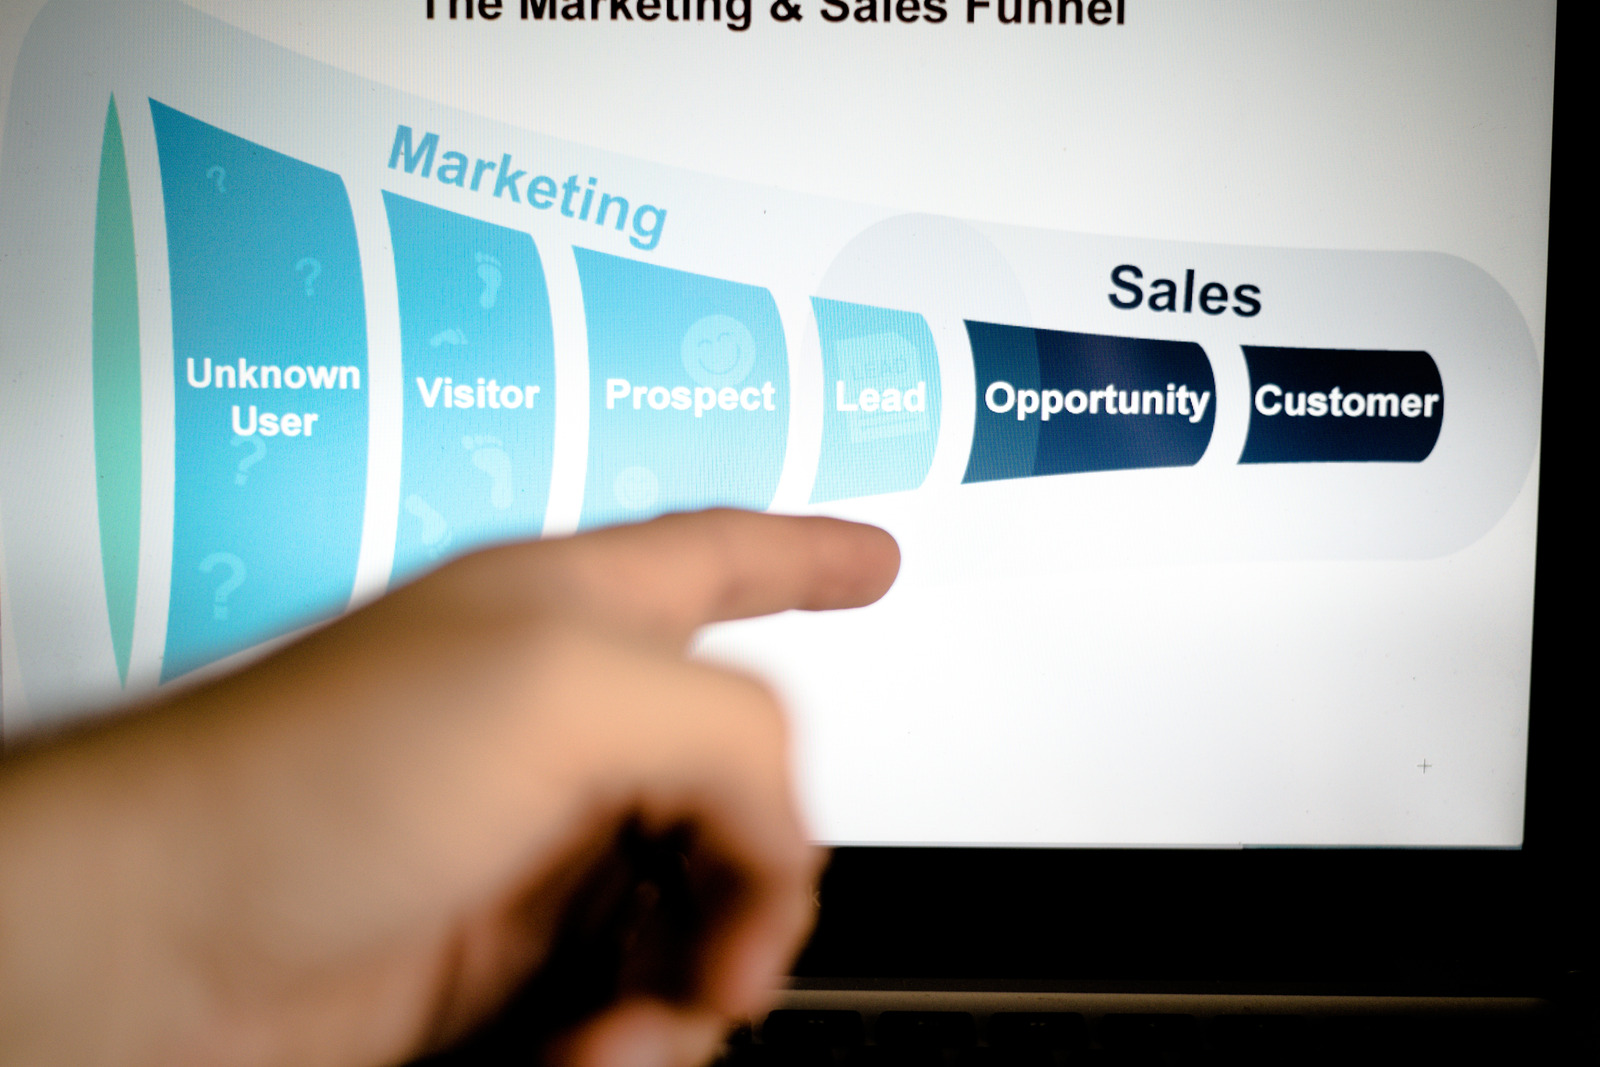 Marketing sales funnel shown on a computer monitor, male hand pointing at screen.